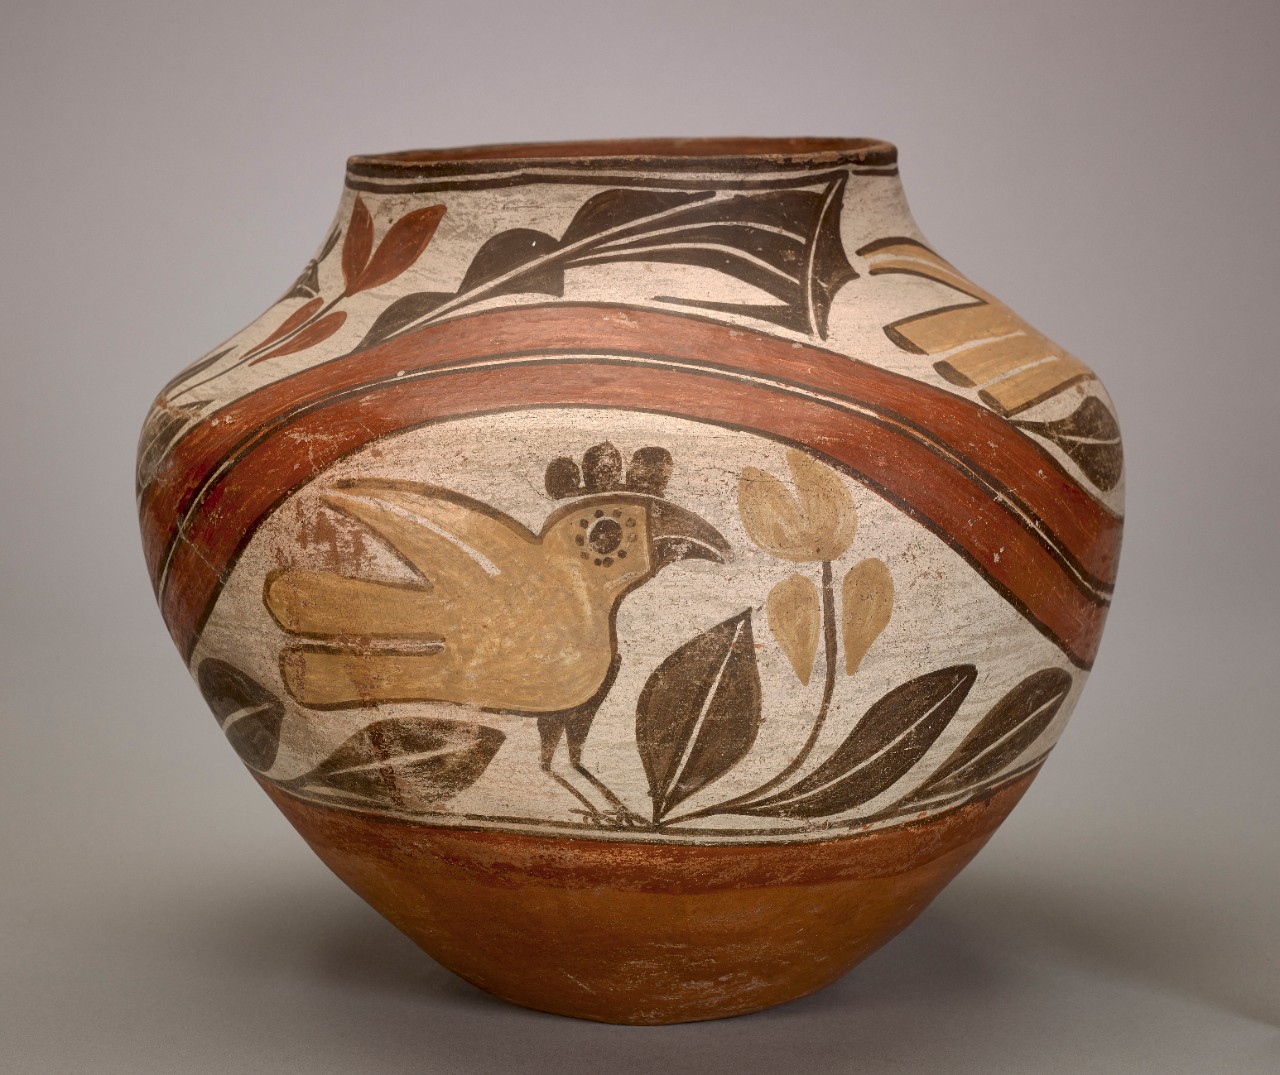 Unidentified Zia artist, Polychrome pot with yellow birds separated by double red lines, ca. 1920, clay with pigment